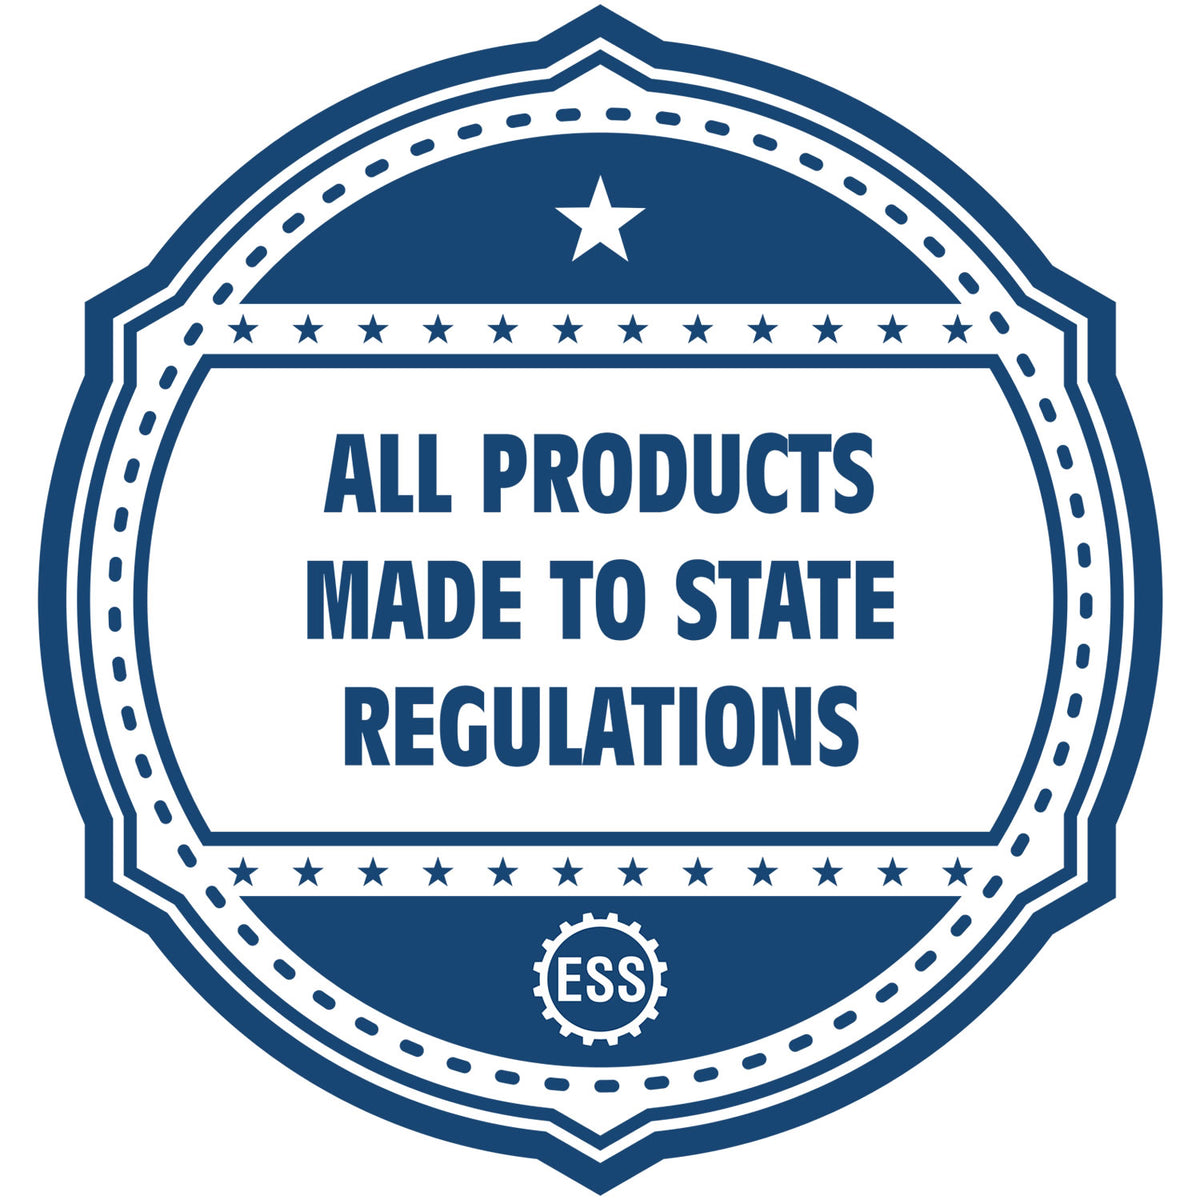 An icon or badge element for the State of Louisiana Extended Long Reach Engineer Seal showing that this product is made in compliance with state regulations.